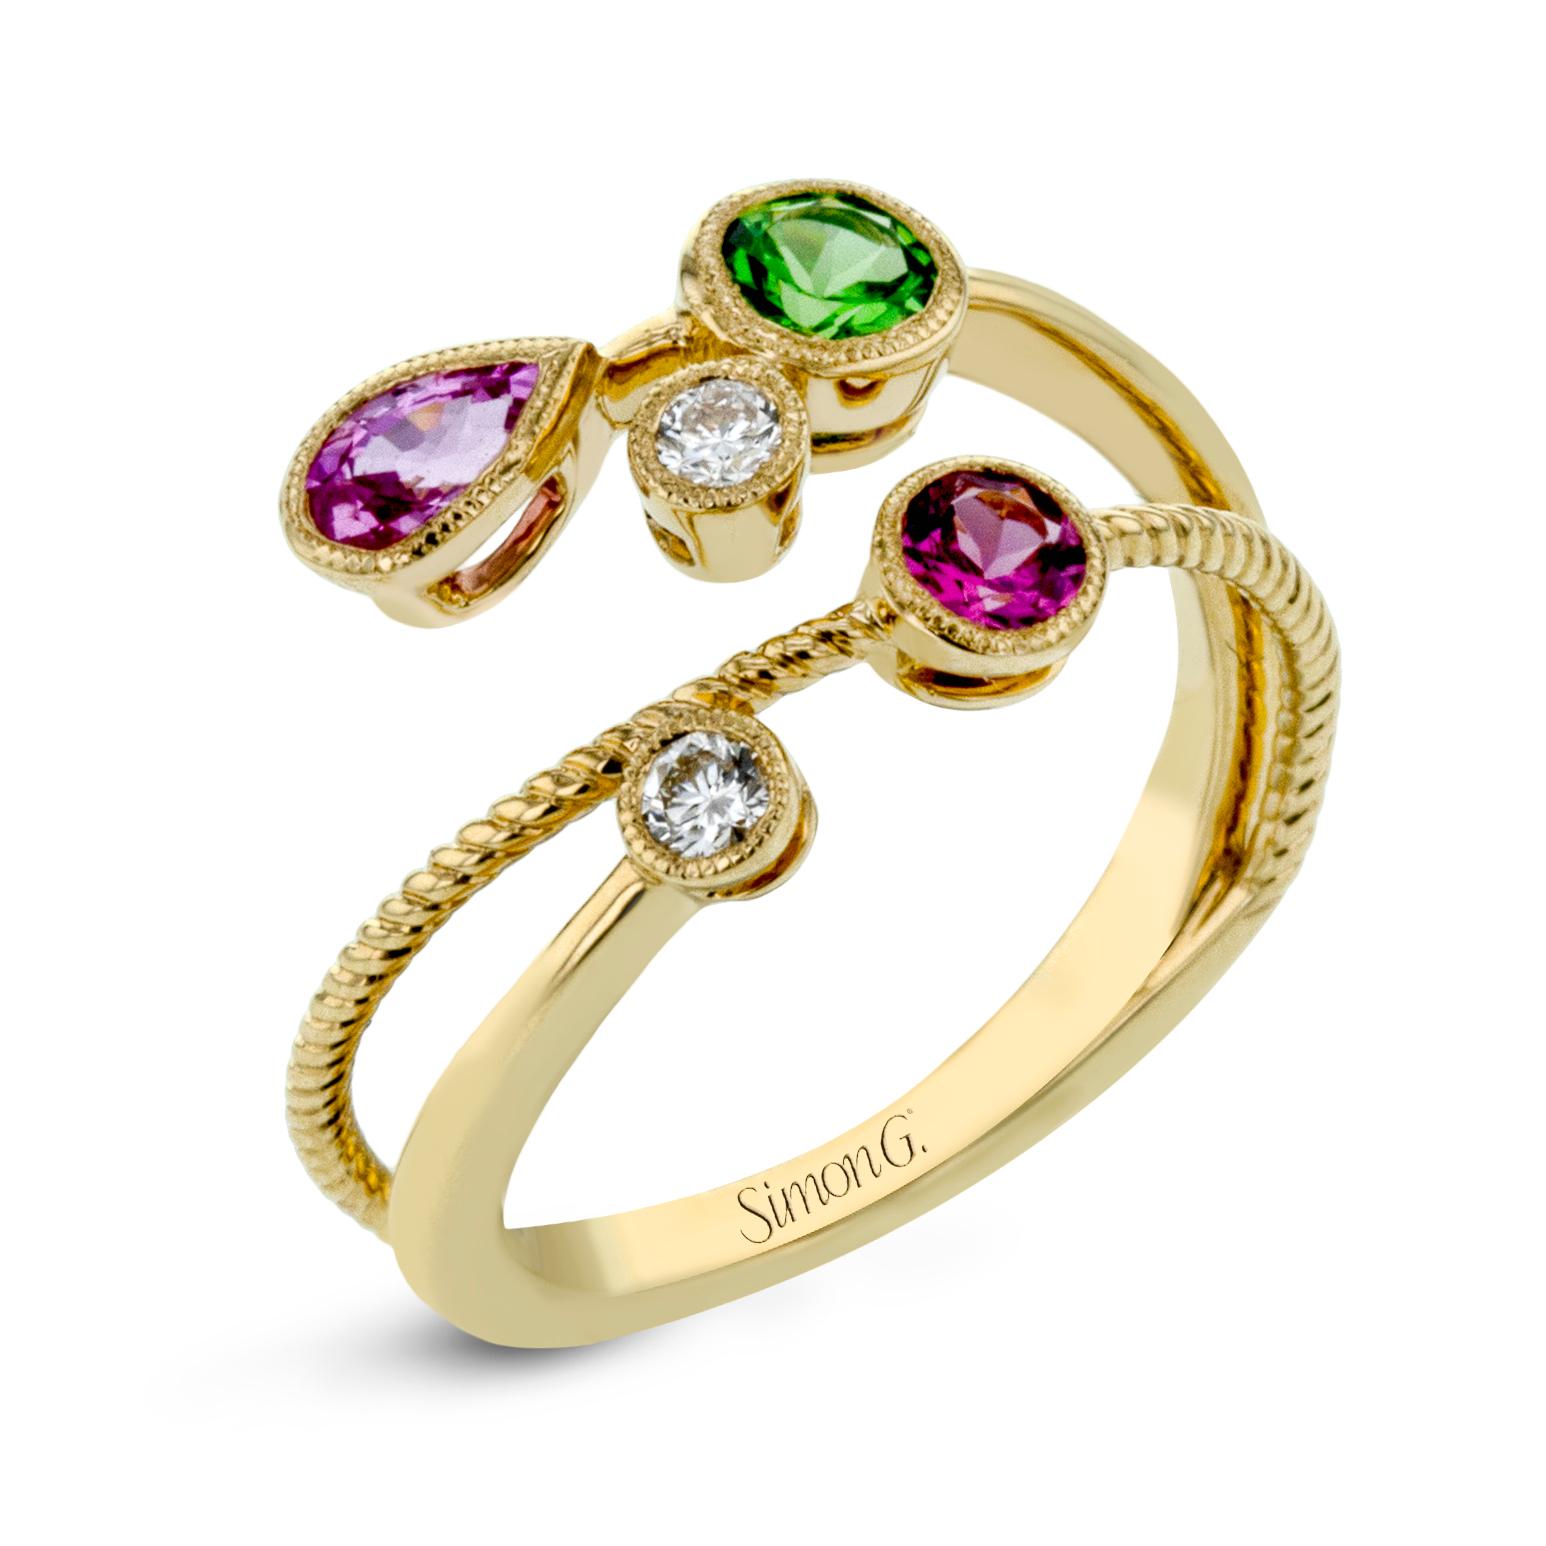 This beautiful and unique ring from Simon G features 0.13ctw of round brilliant cut white diamonds, one 0.30ct  green tsavorite, one 0.28ct pink sapphire, and 0.20 carat of pink spinel set in 18 karat yellow gold with a braided detail on the band.